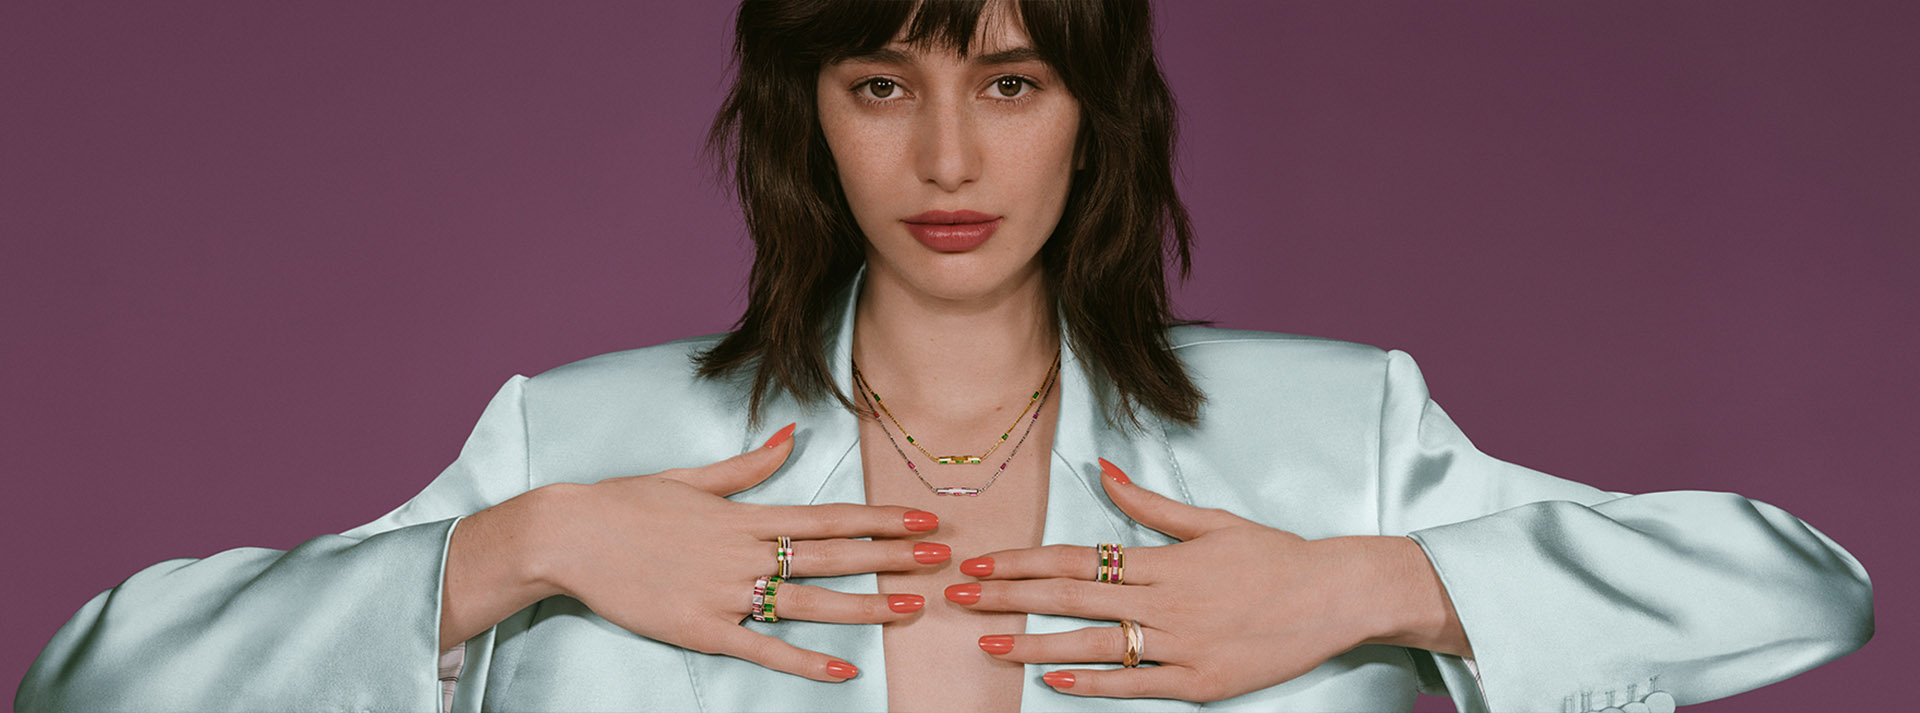 Gucci Womans Necklace and Model